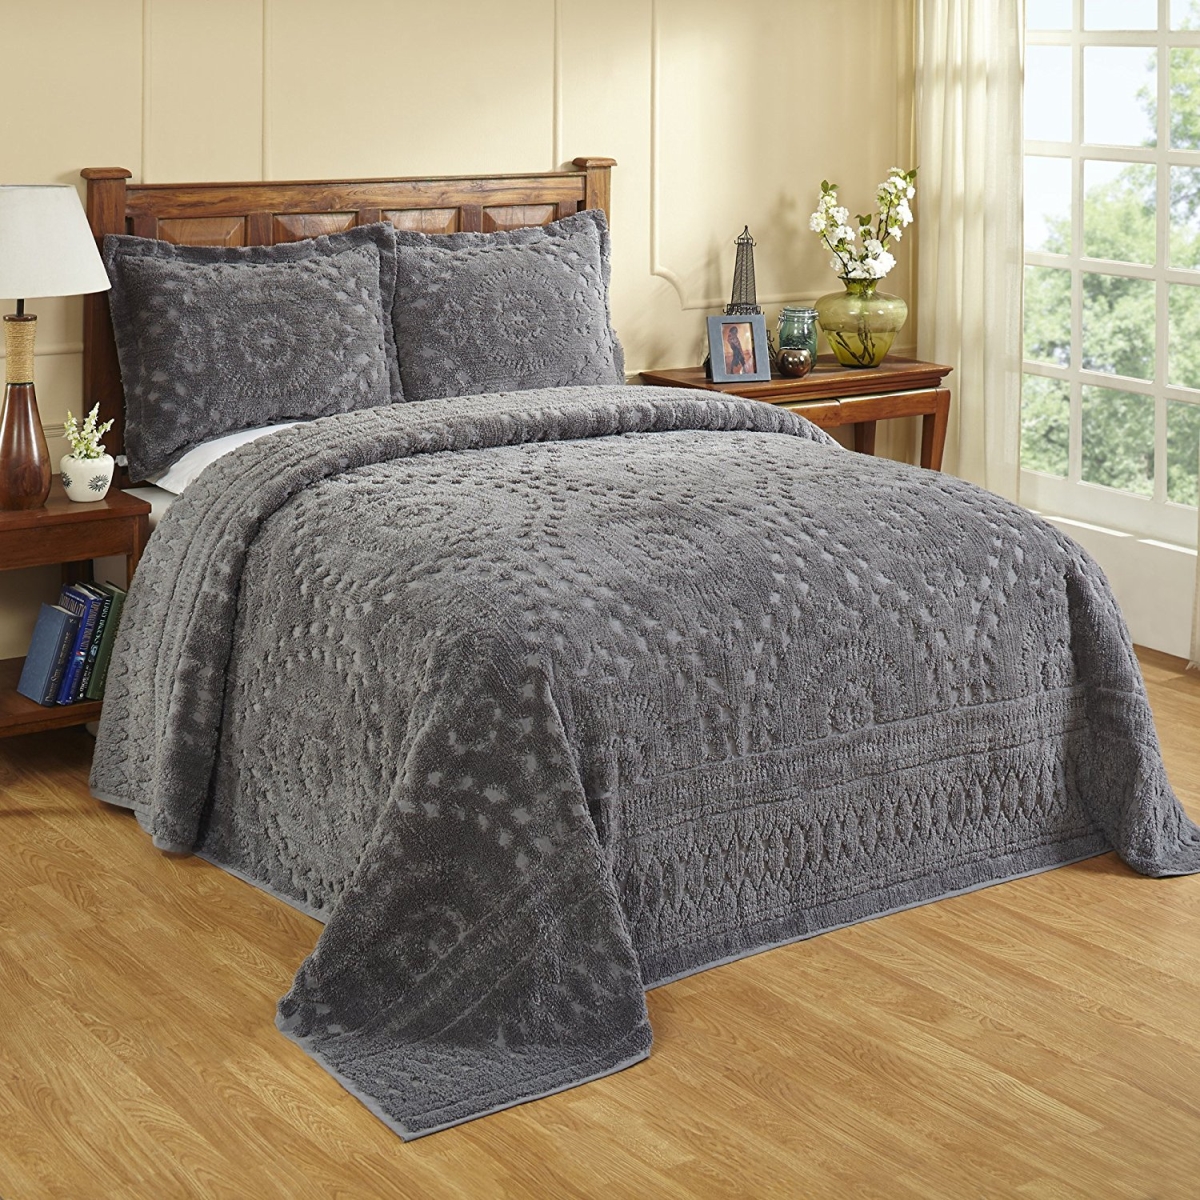 Bsrqugry 102 X 110 In. Rio Chenille Bedspread, Grey - Queen